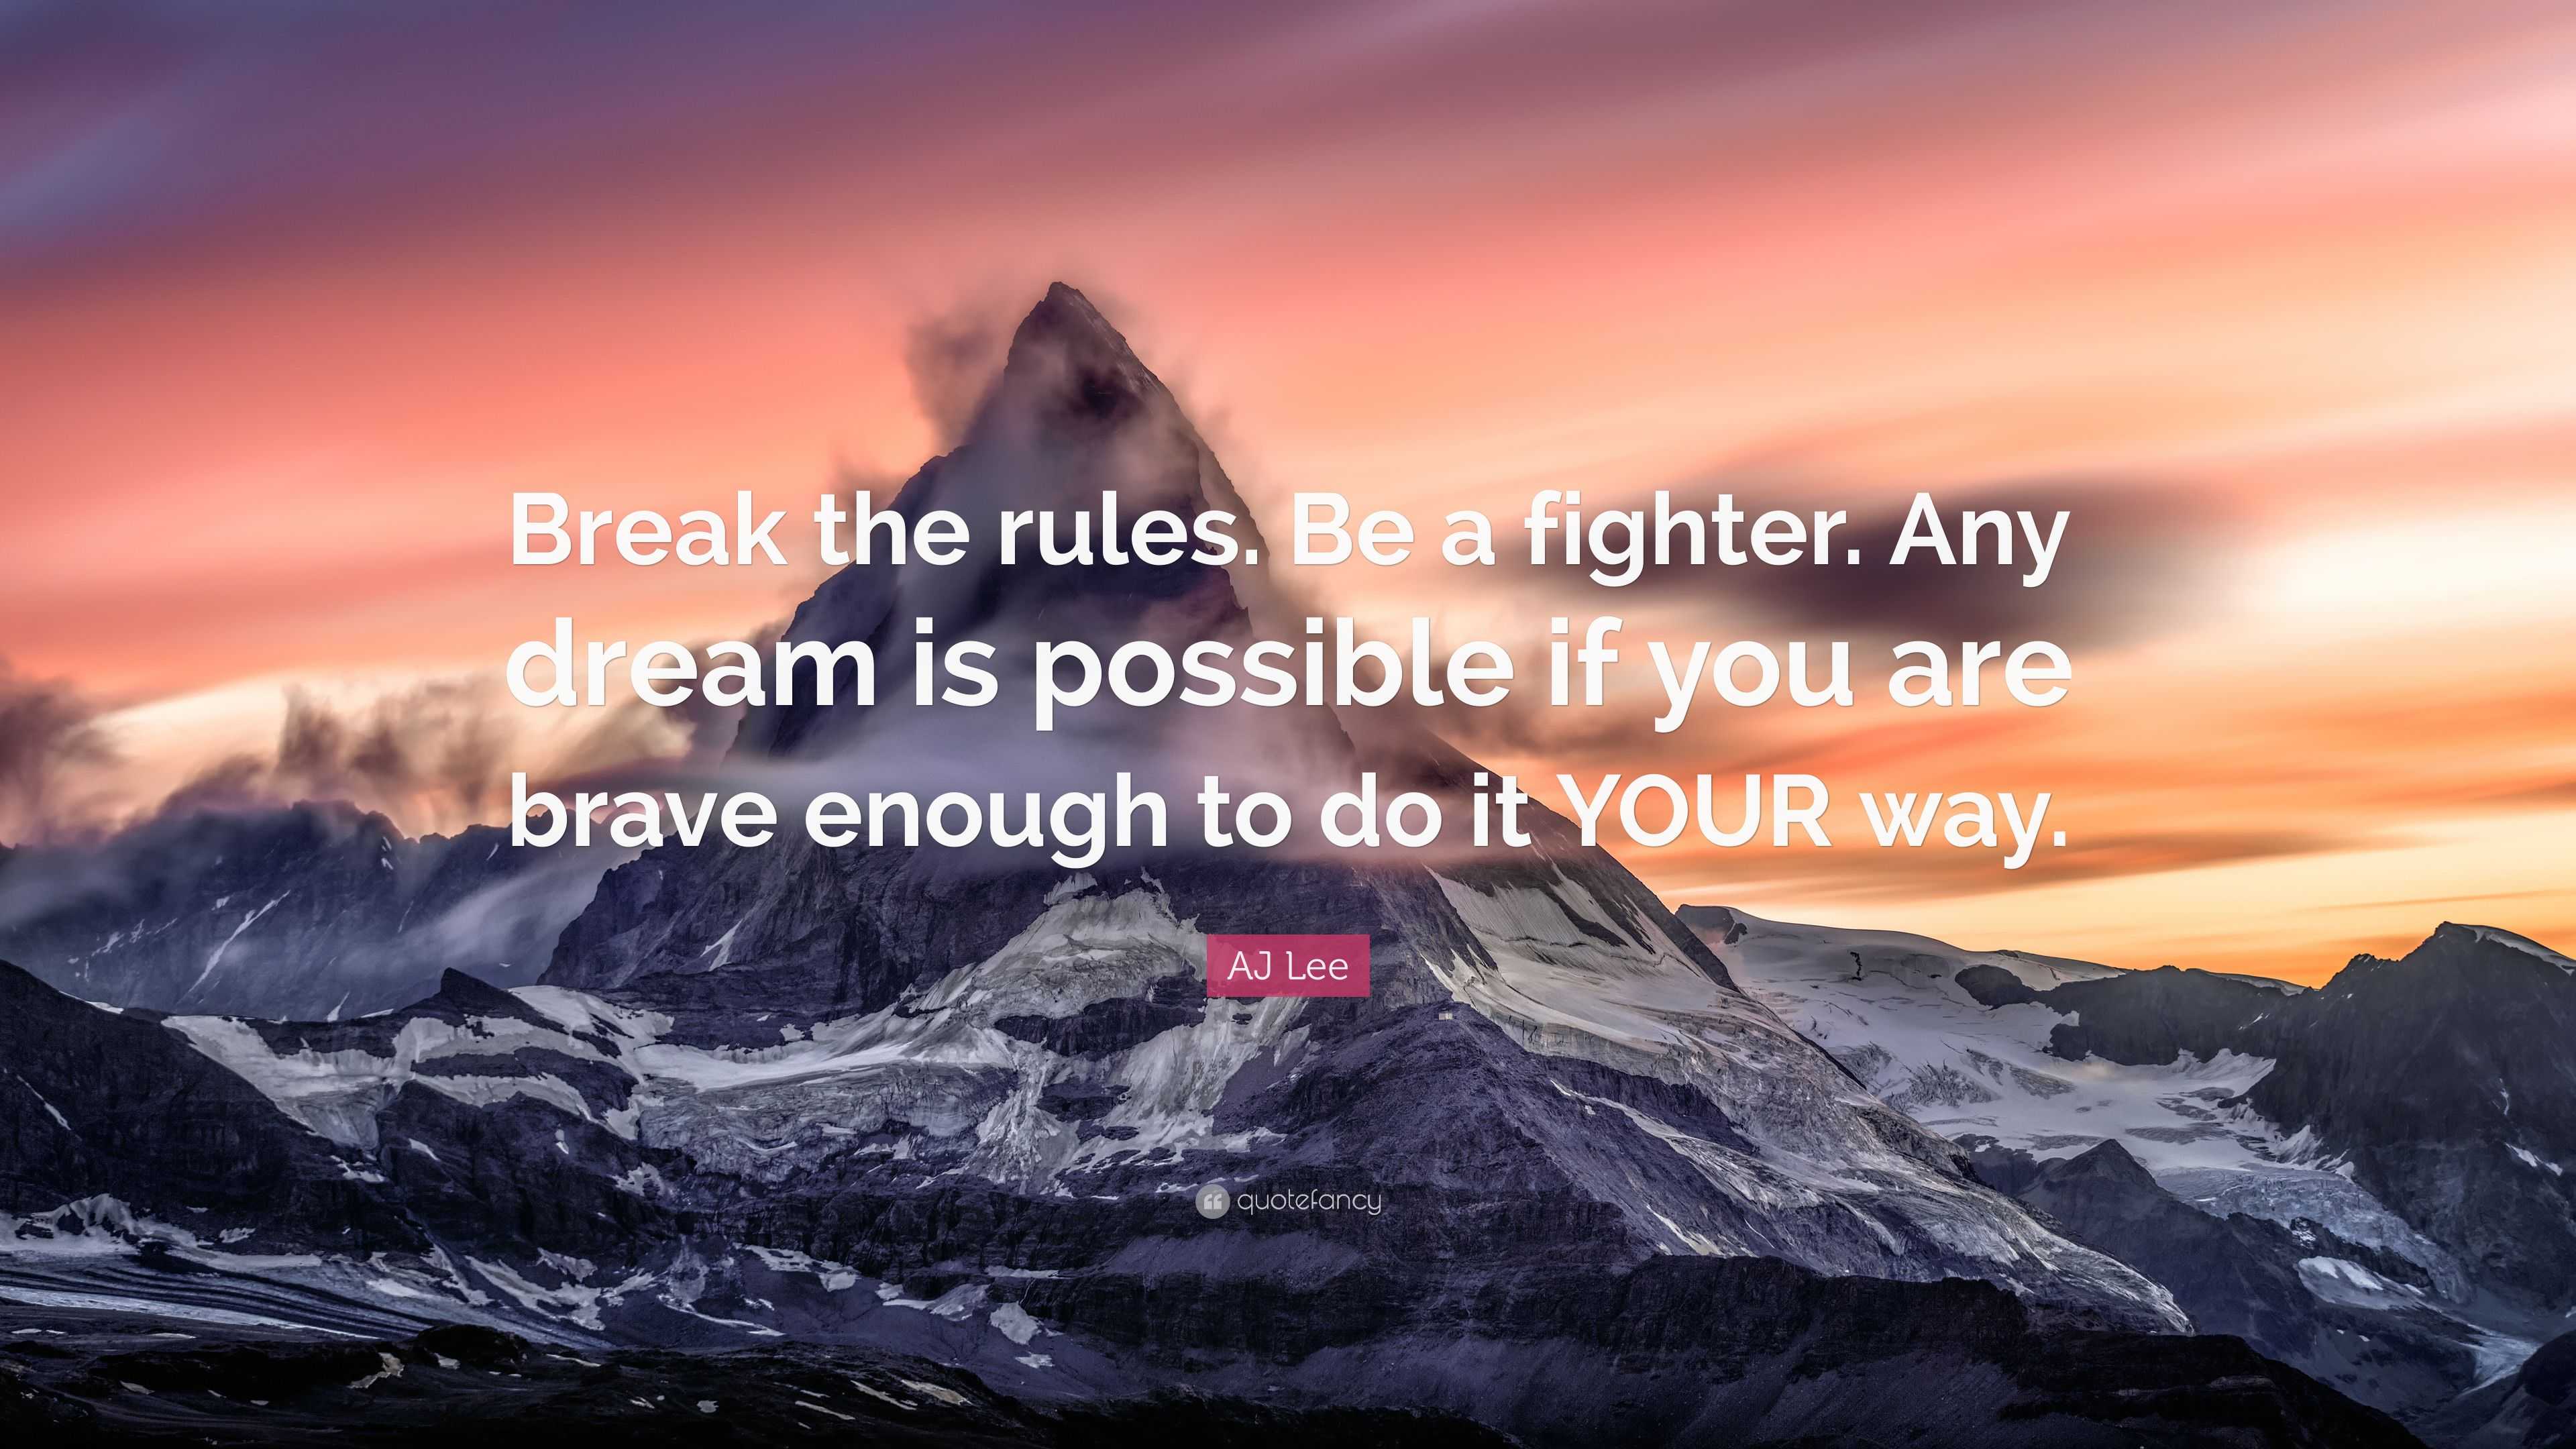 AJ Lee Quote: "Break the rules. Be a fighter. Any dream is ...